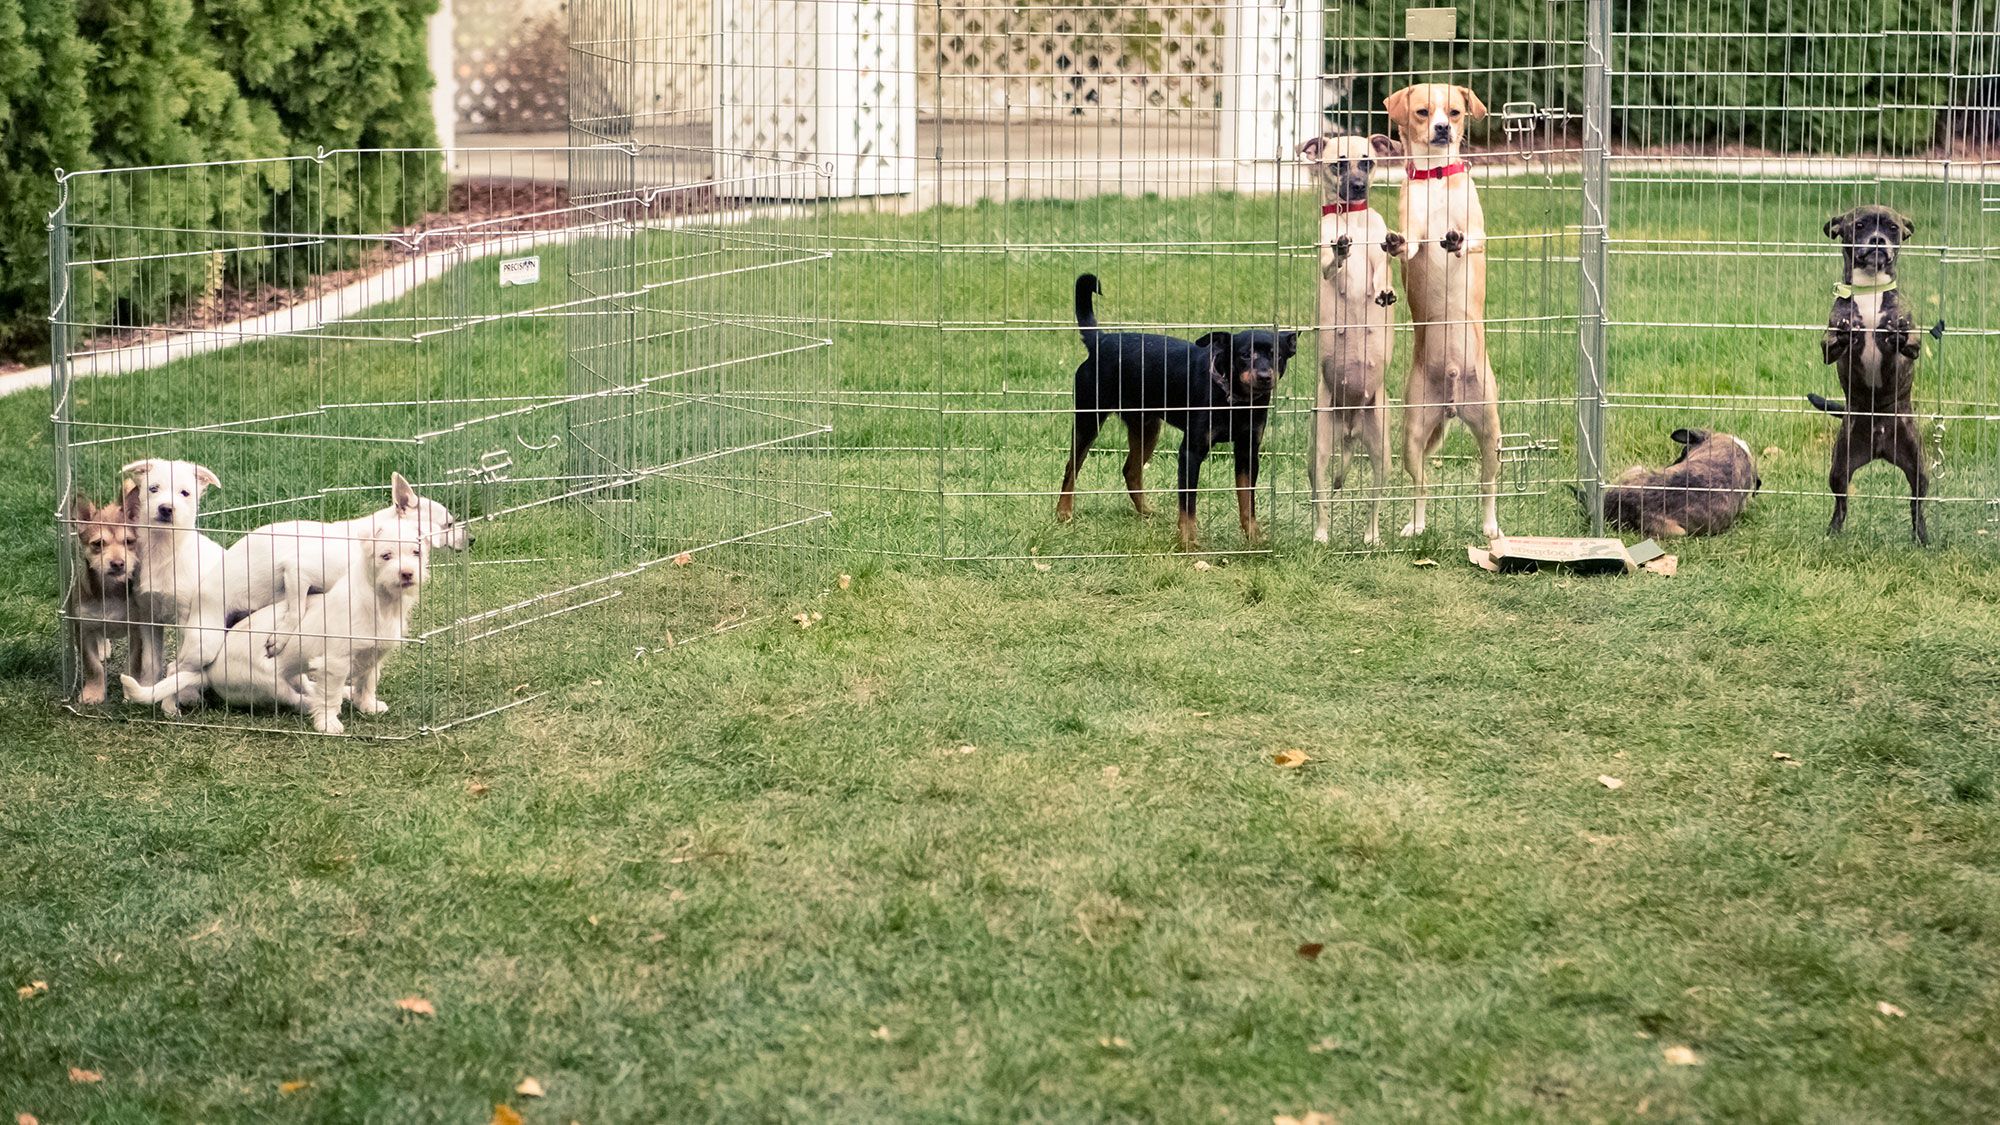 Dogs play in safe outdoor caged spaces